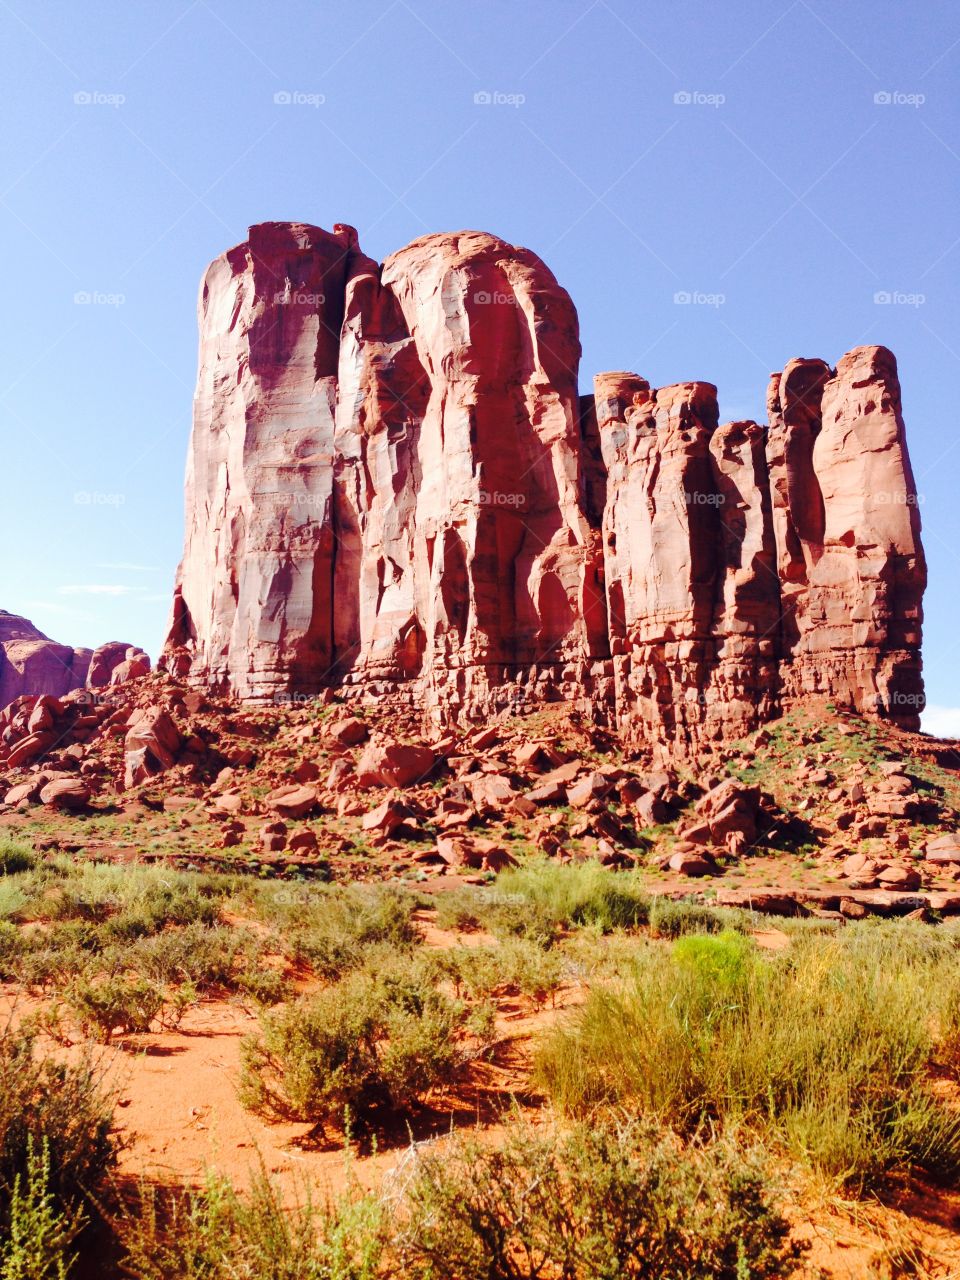 A big red rock in the monument valley tribal park